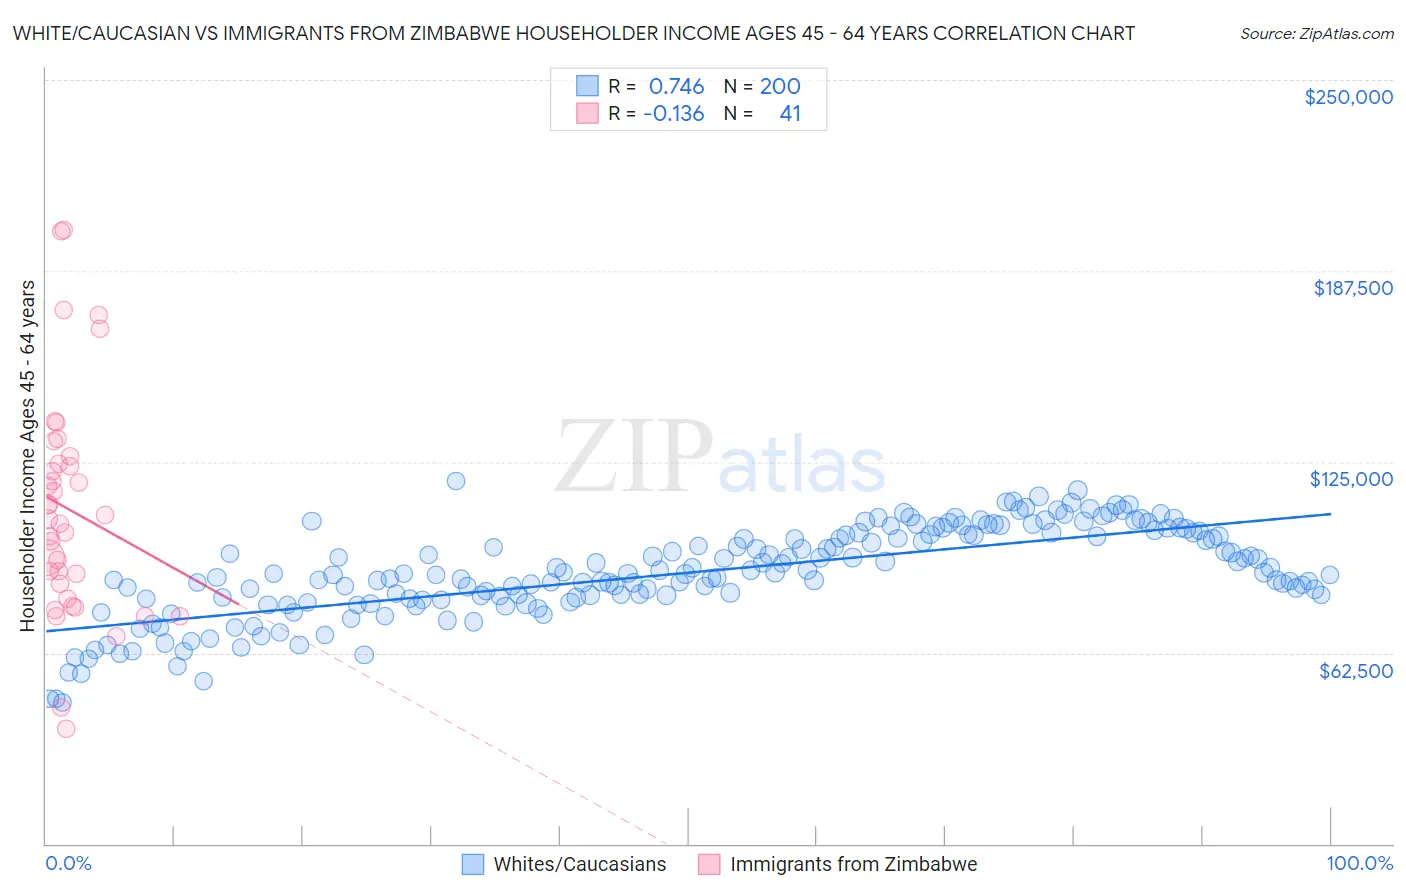 White/Caucasian vs Immigrants from Zimbabwe Householder Income Ages 45 - 64 years